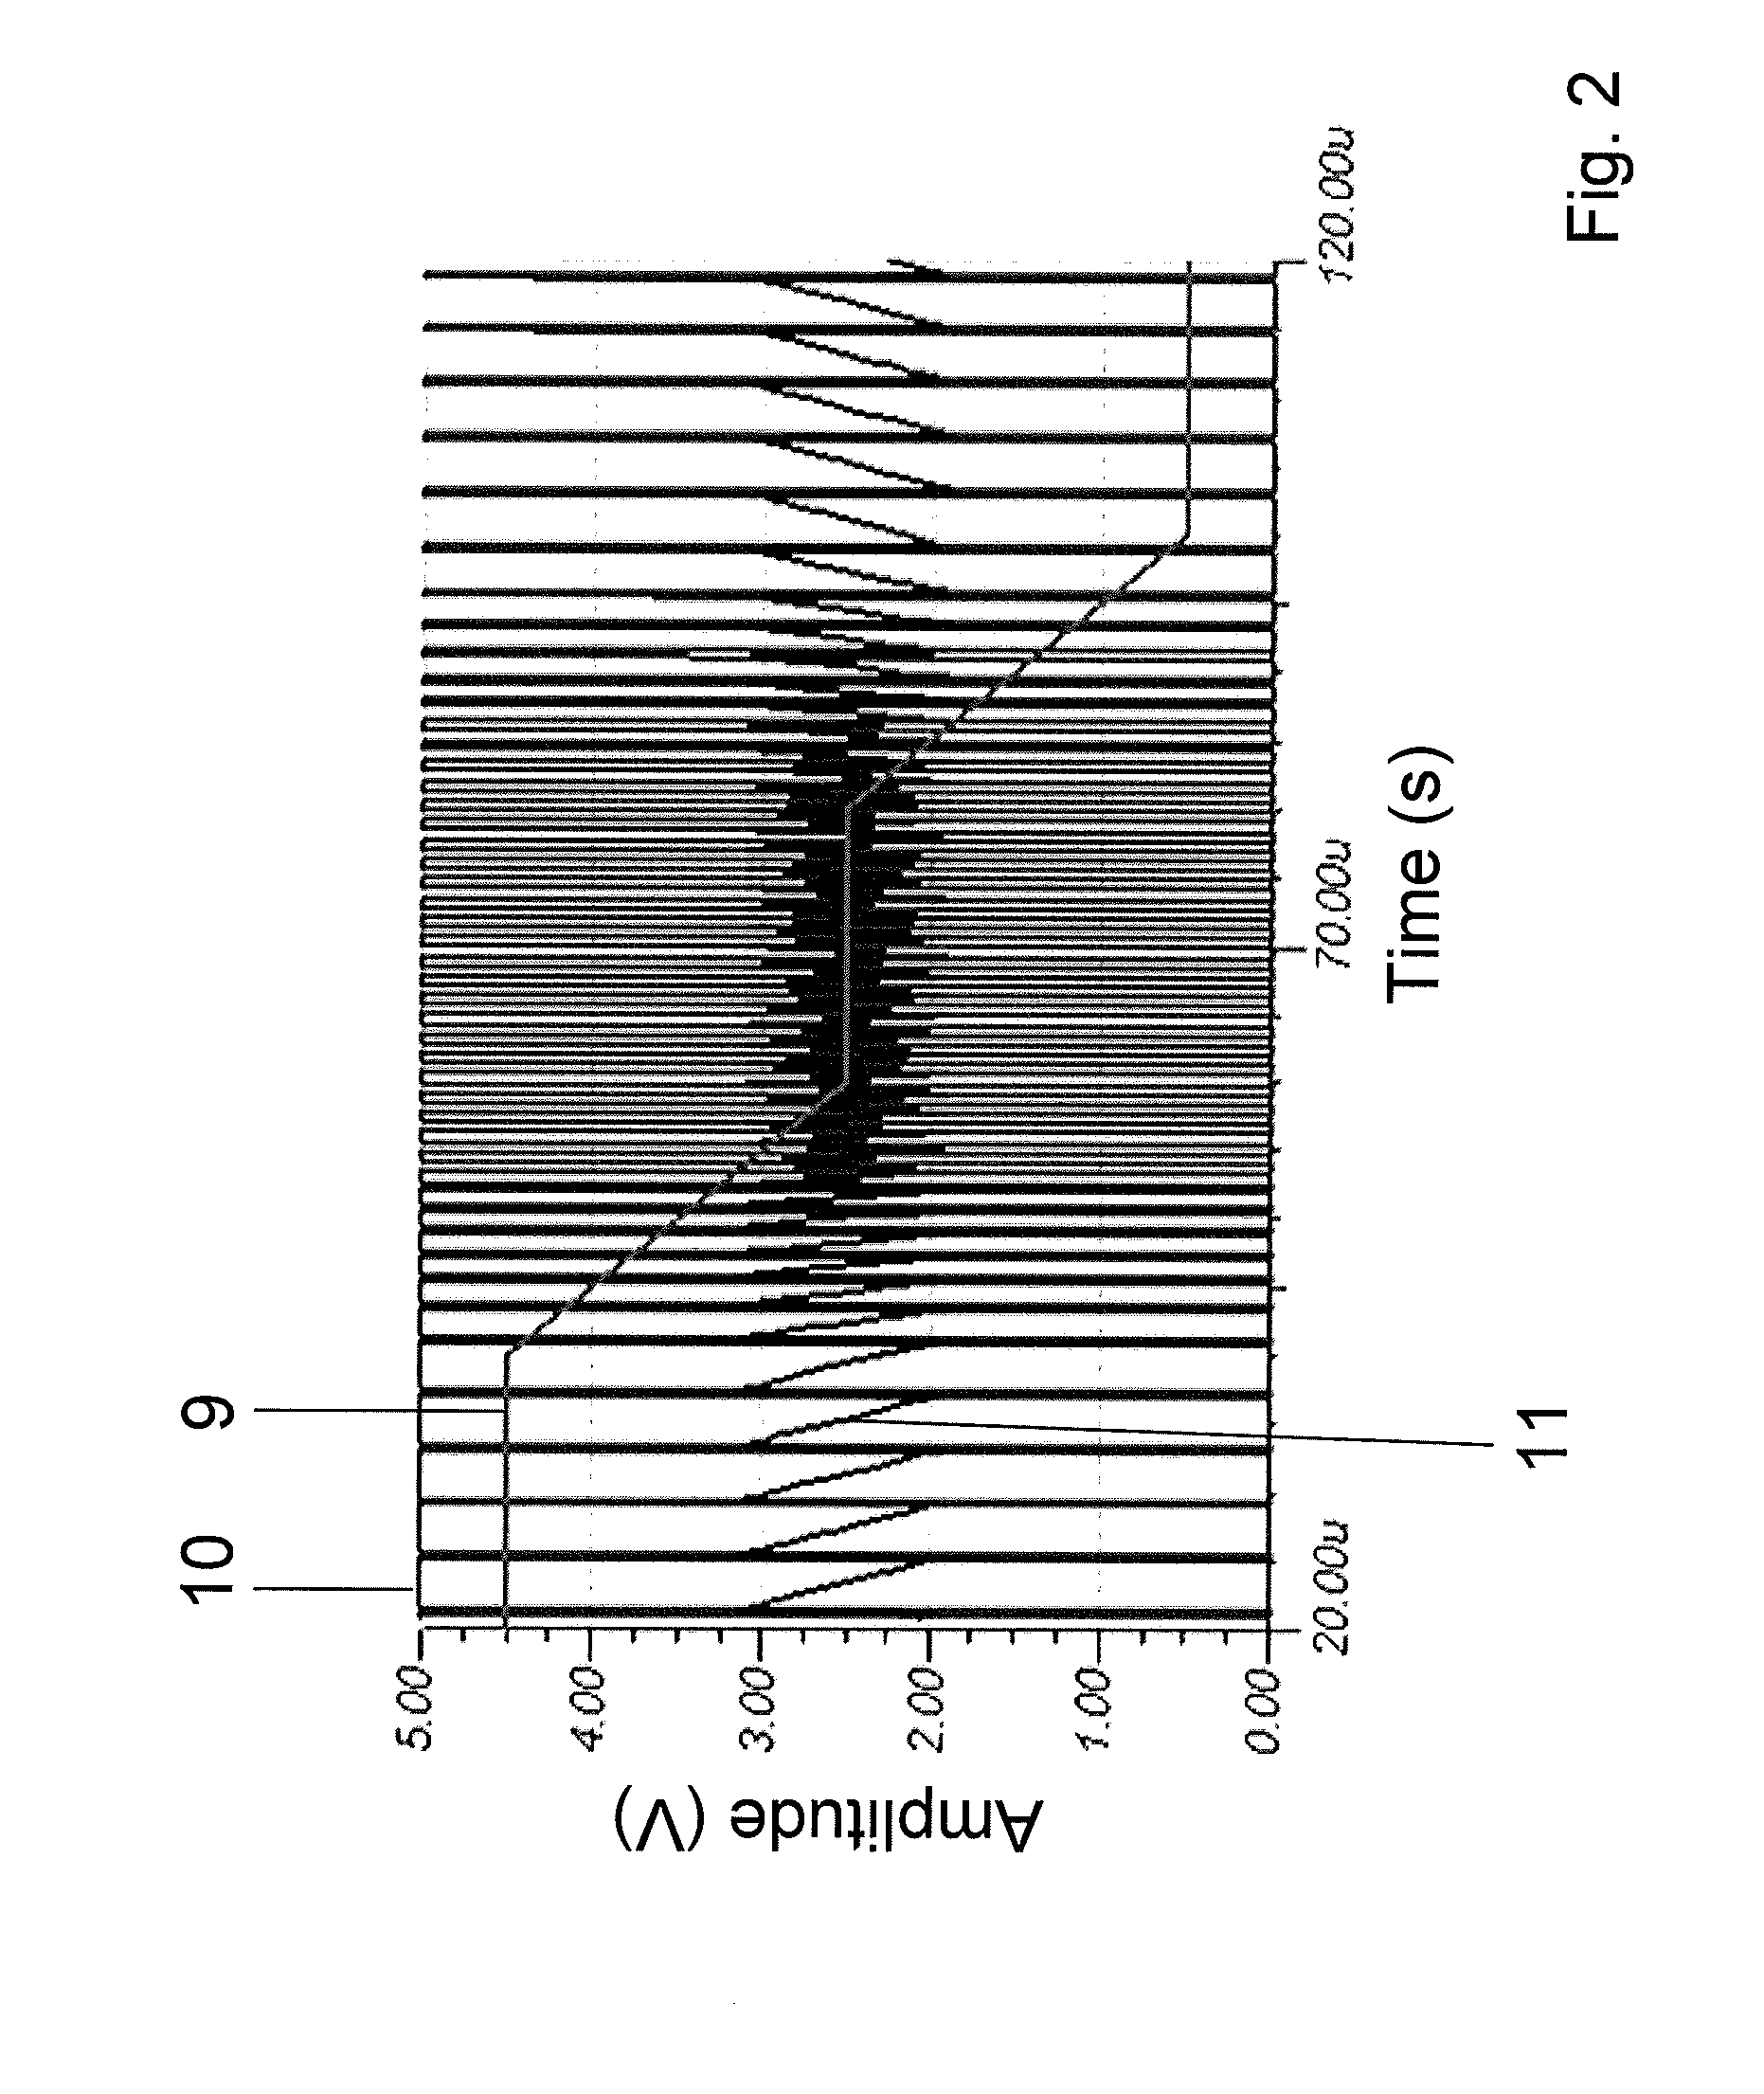 Current sensor operating in accordance with the principle of compensation